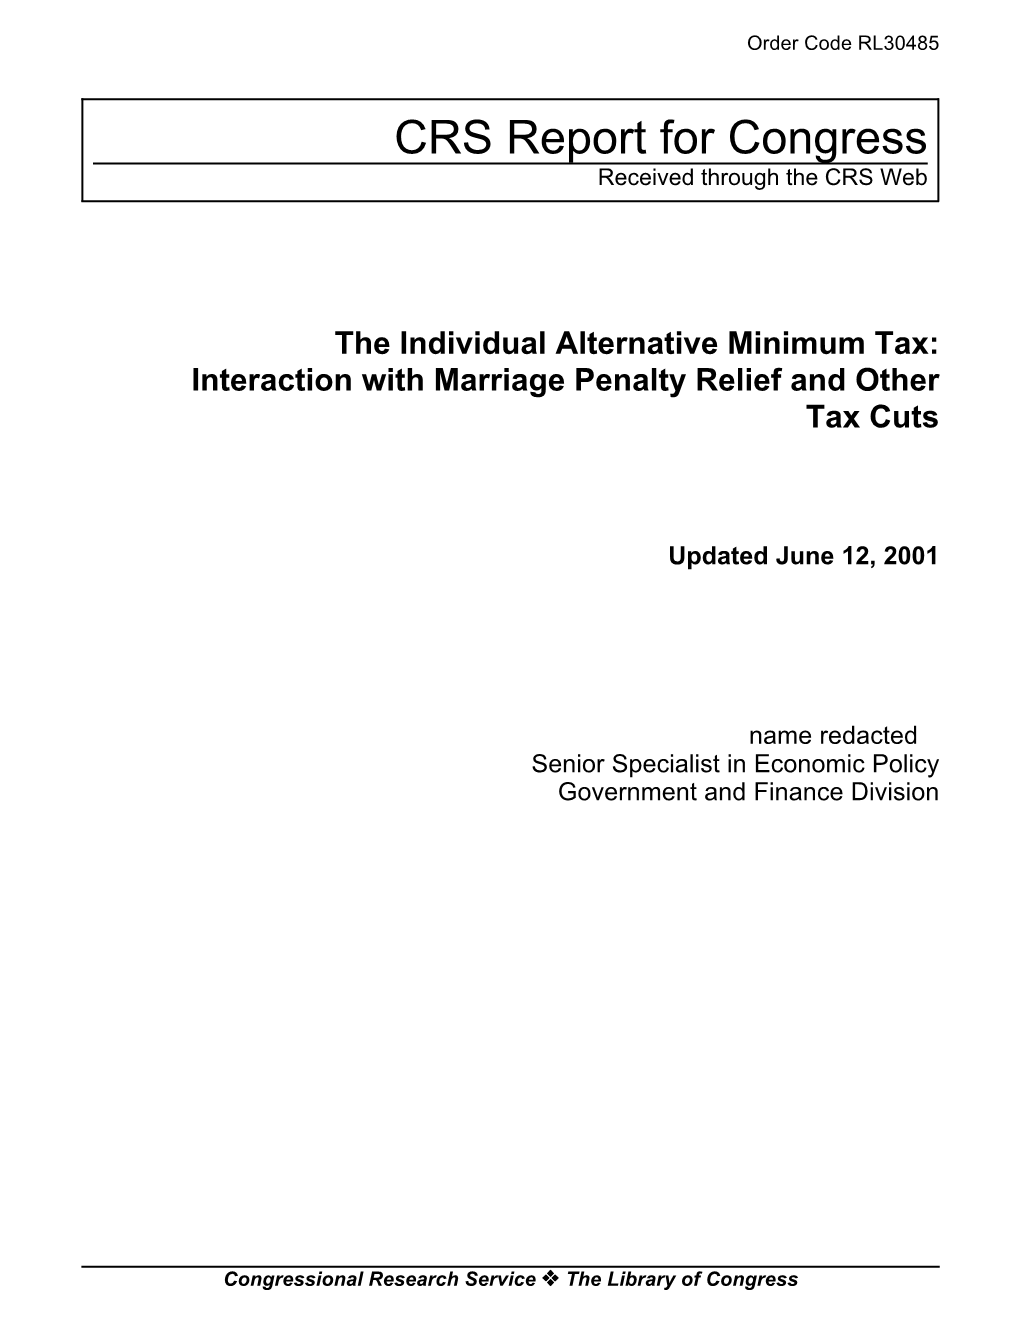 Interaction with Marriage Penalty Relief and Other Tax Cuts